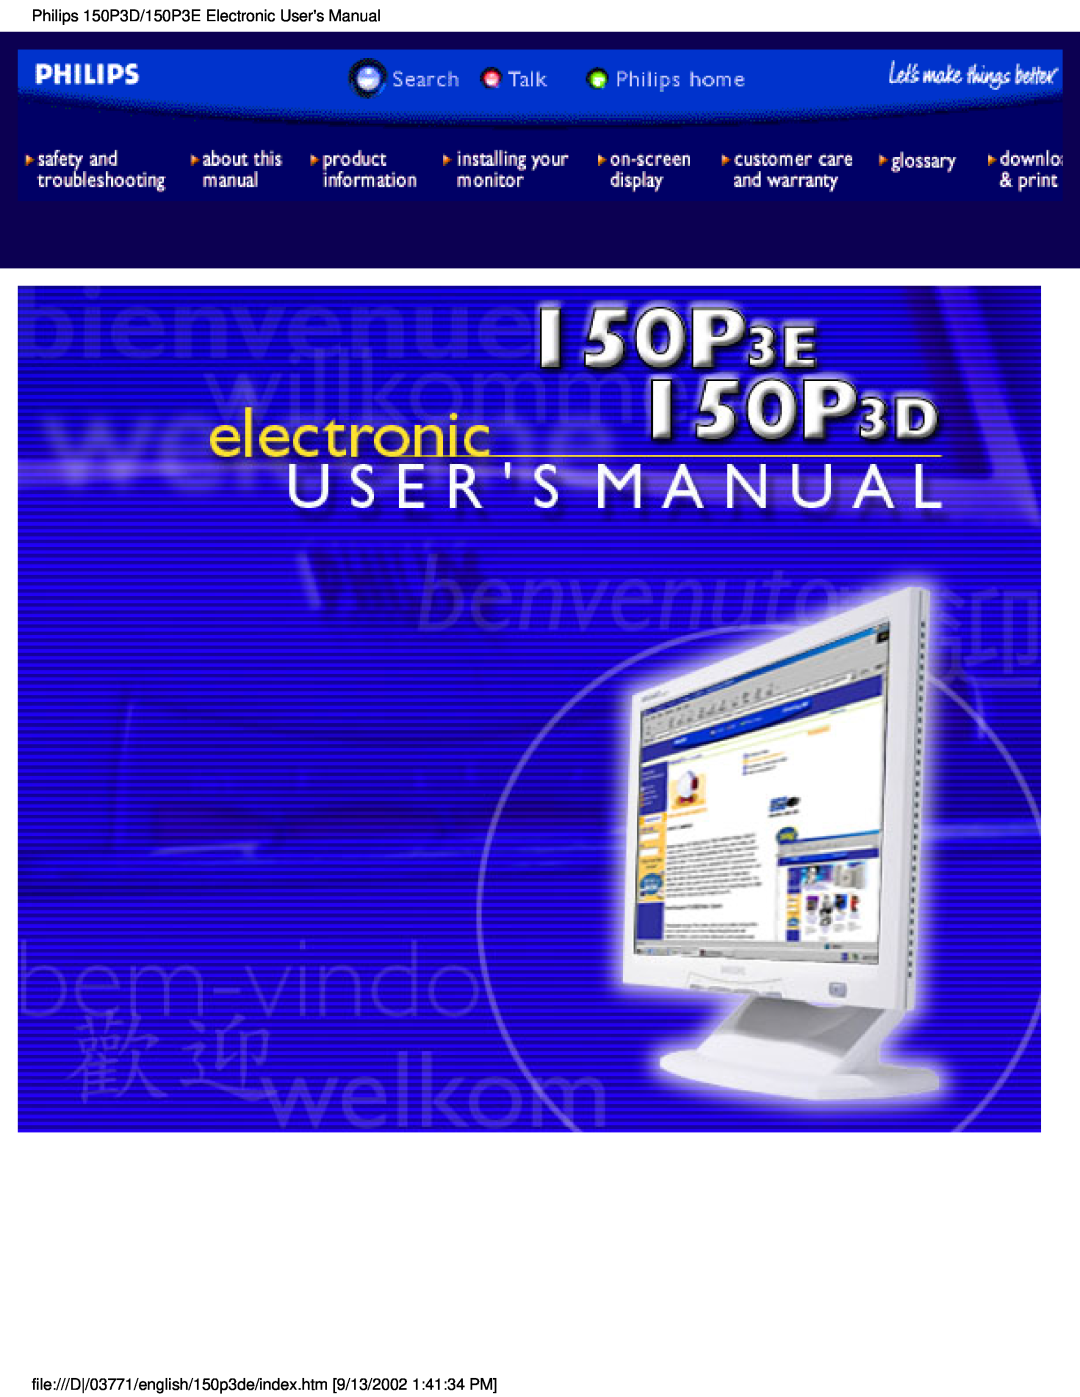 Philips user manual Philips 150P3D/150P3E Electronic Users Manual 